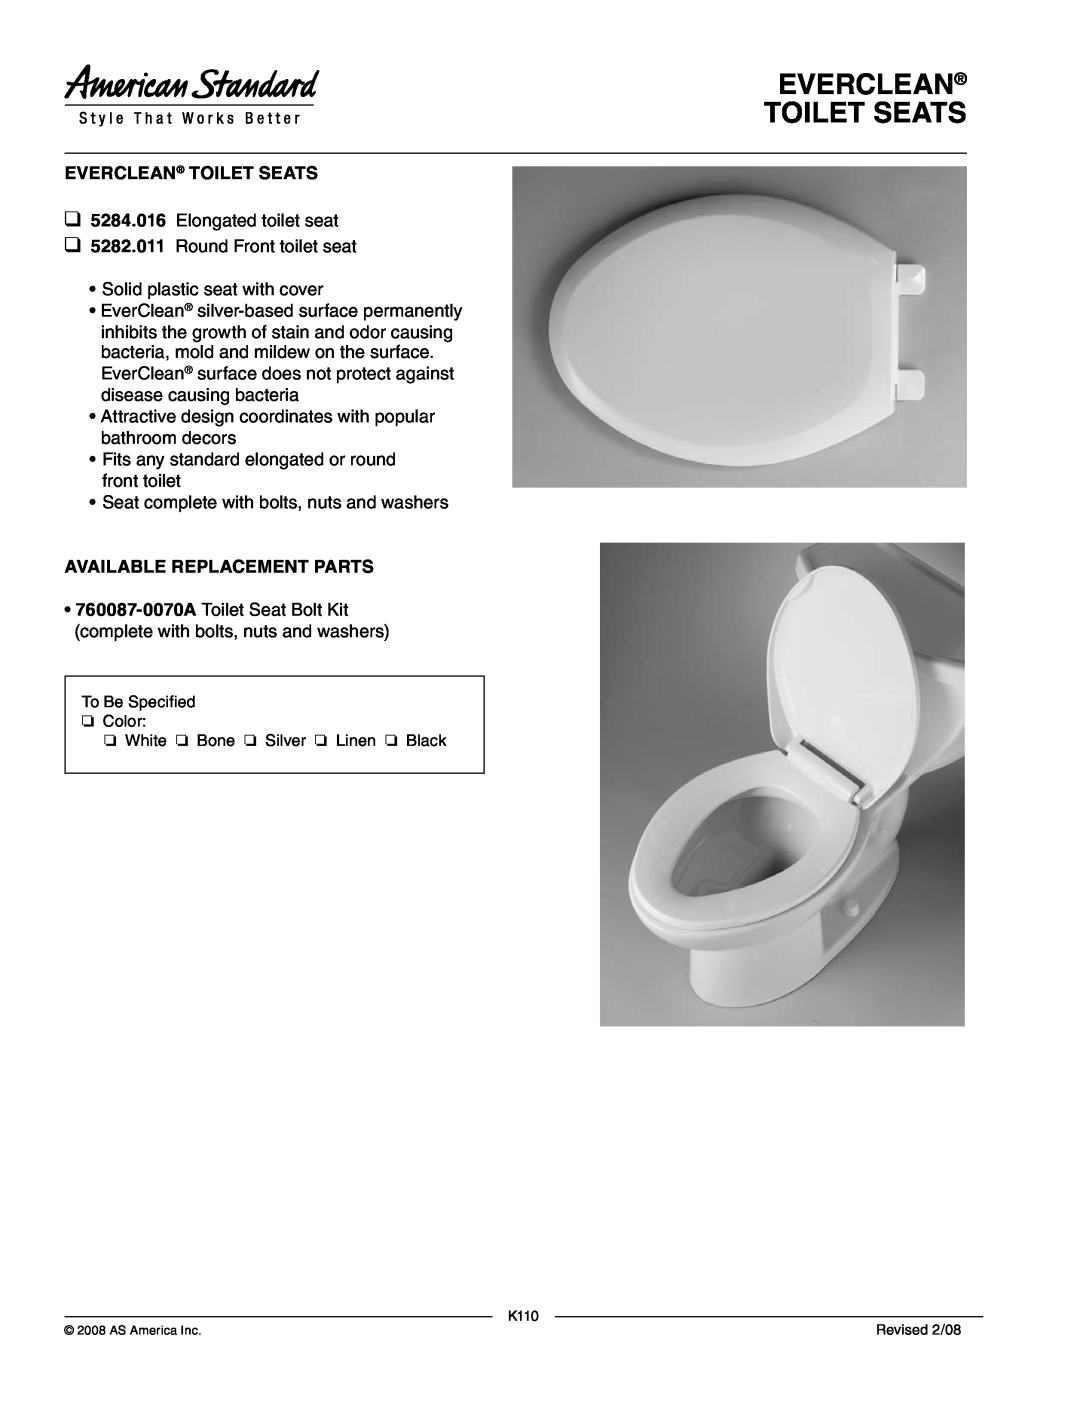 American Standard 5282.011, 5284.016 manual Everclean Toilet Seats, Available Replacement Parts 